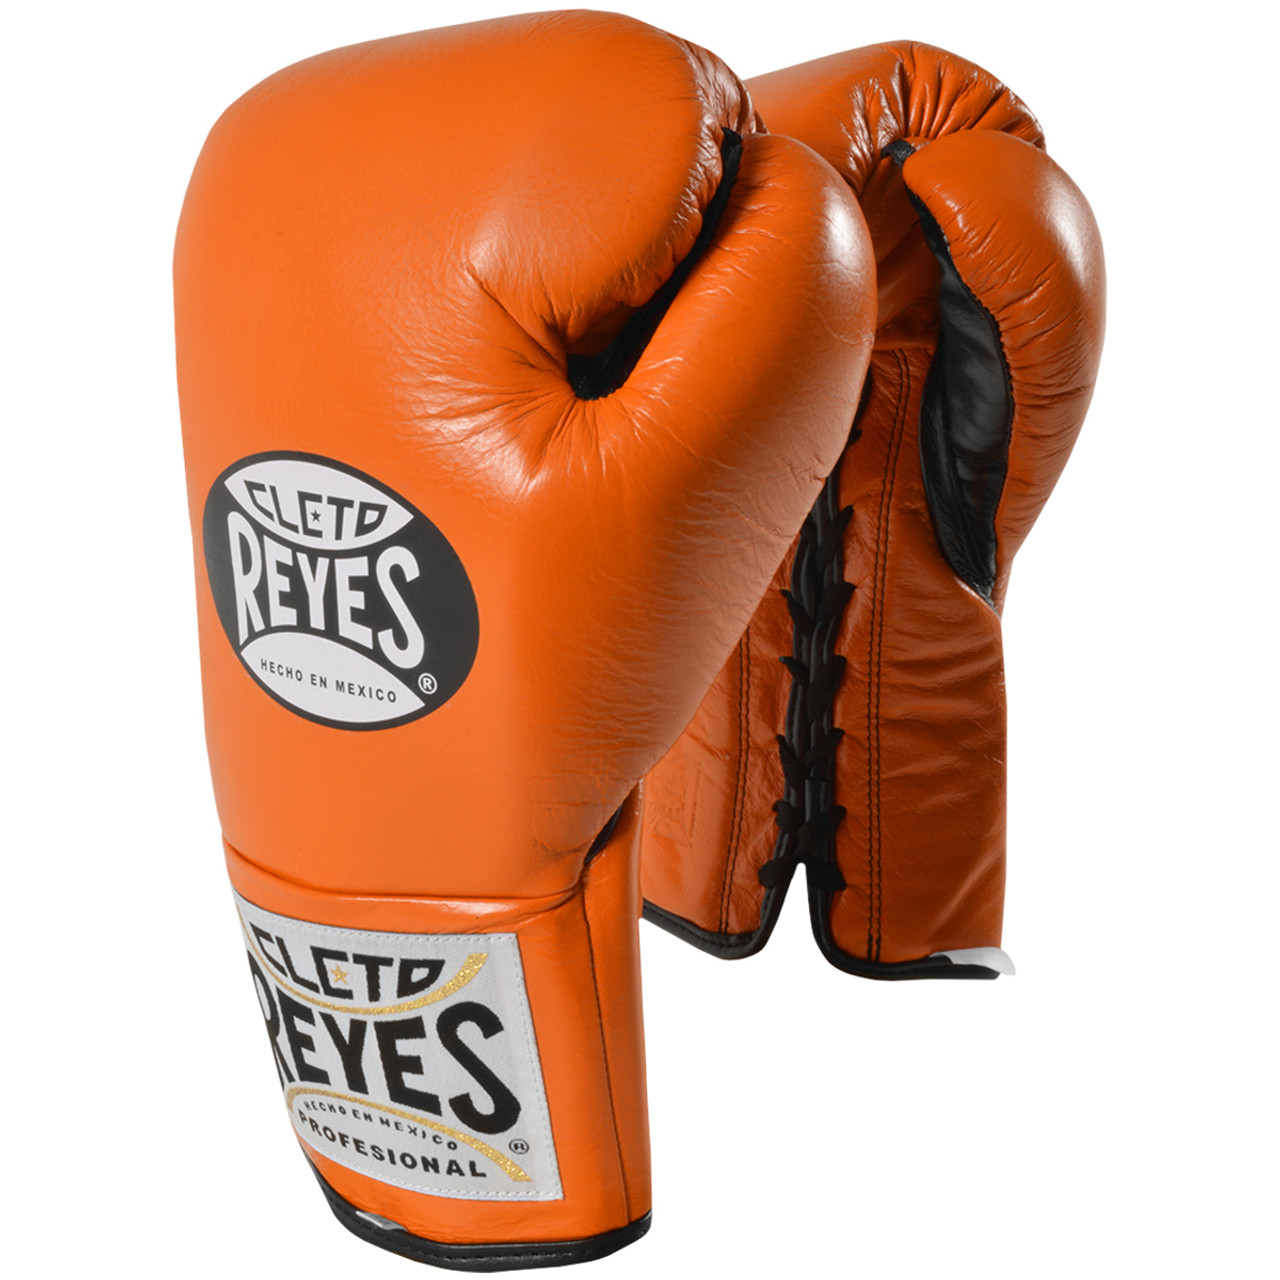 Cleto Reyes Lace-Up Training Boxing Gloves White Color